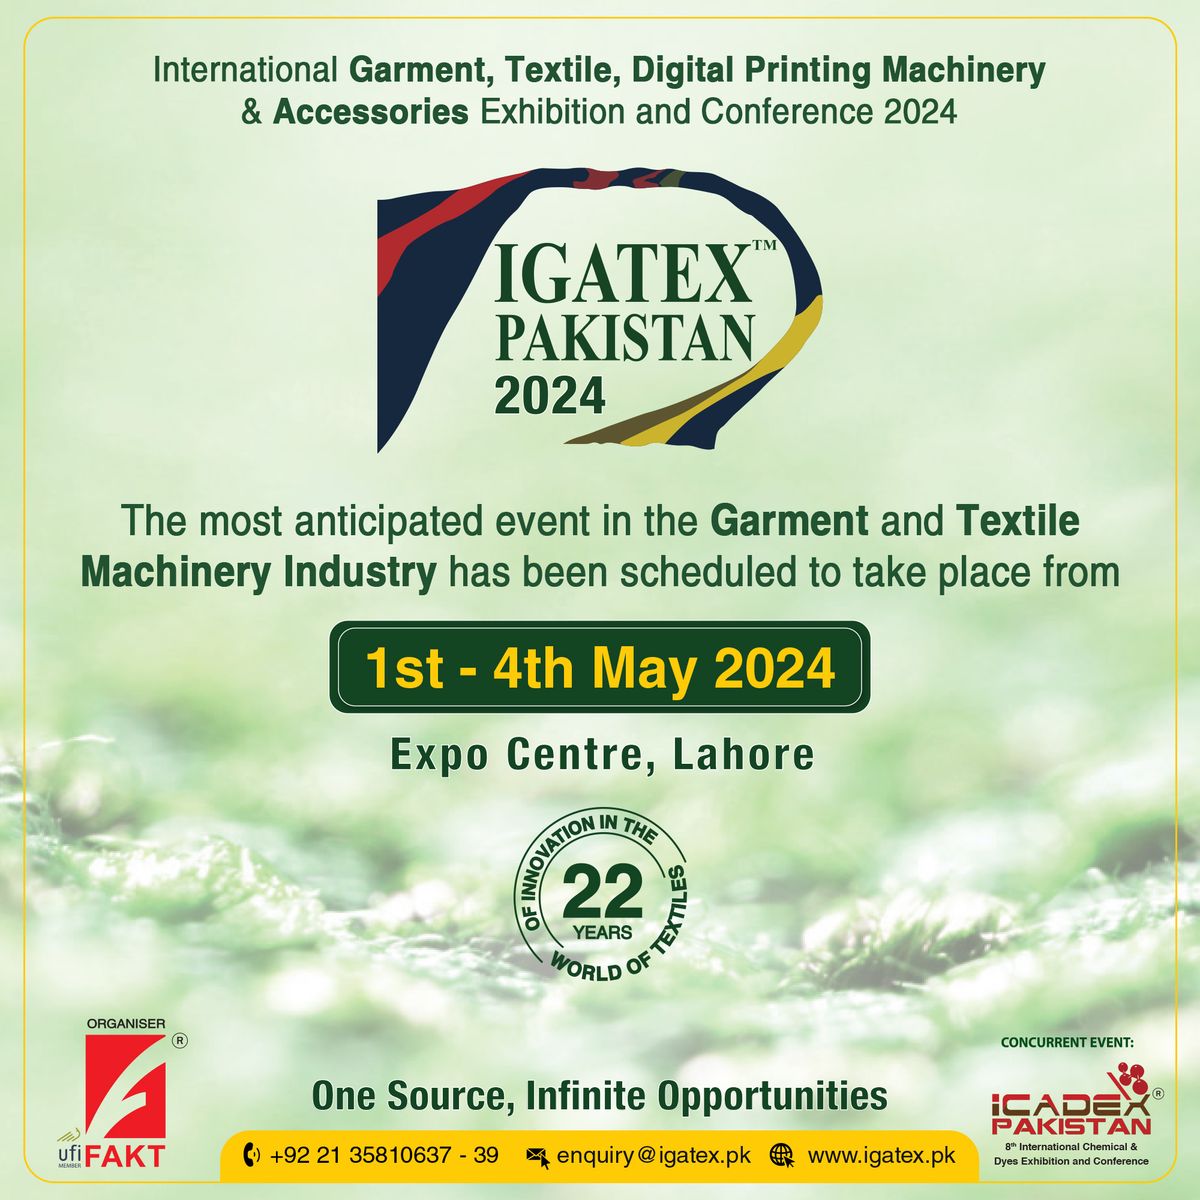 IGATEX PAKISTAN 2024 - Pakistan's Biggest Exhibition in the Garment and Textile Industry 